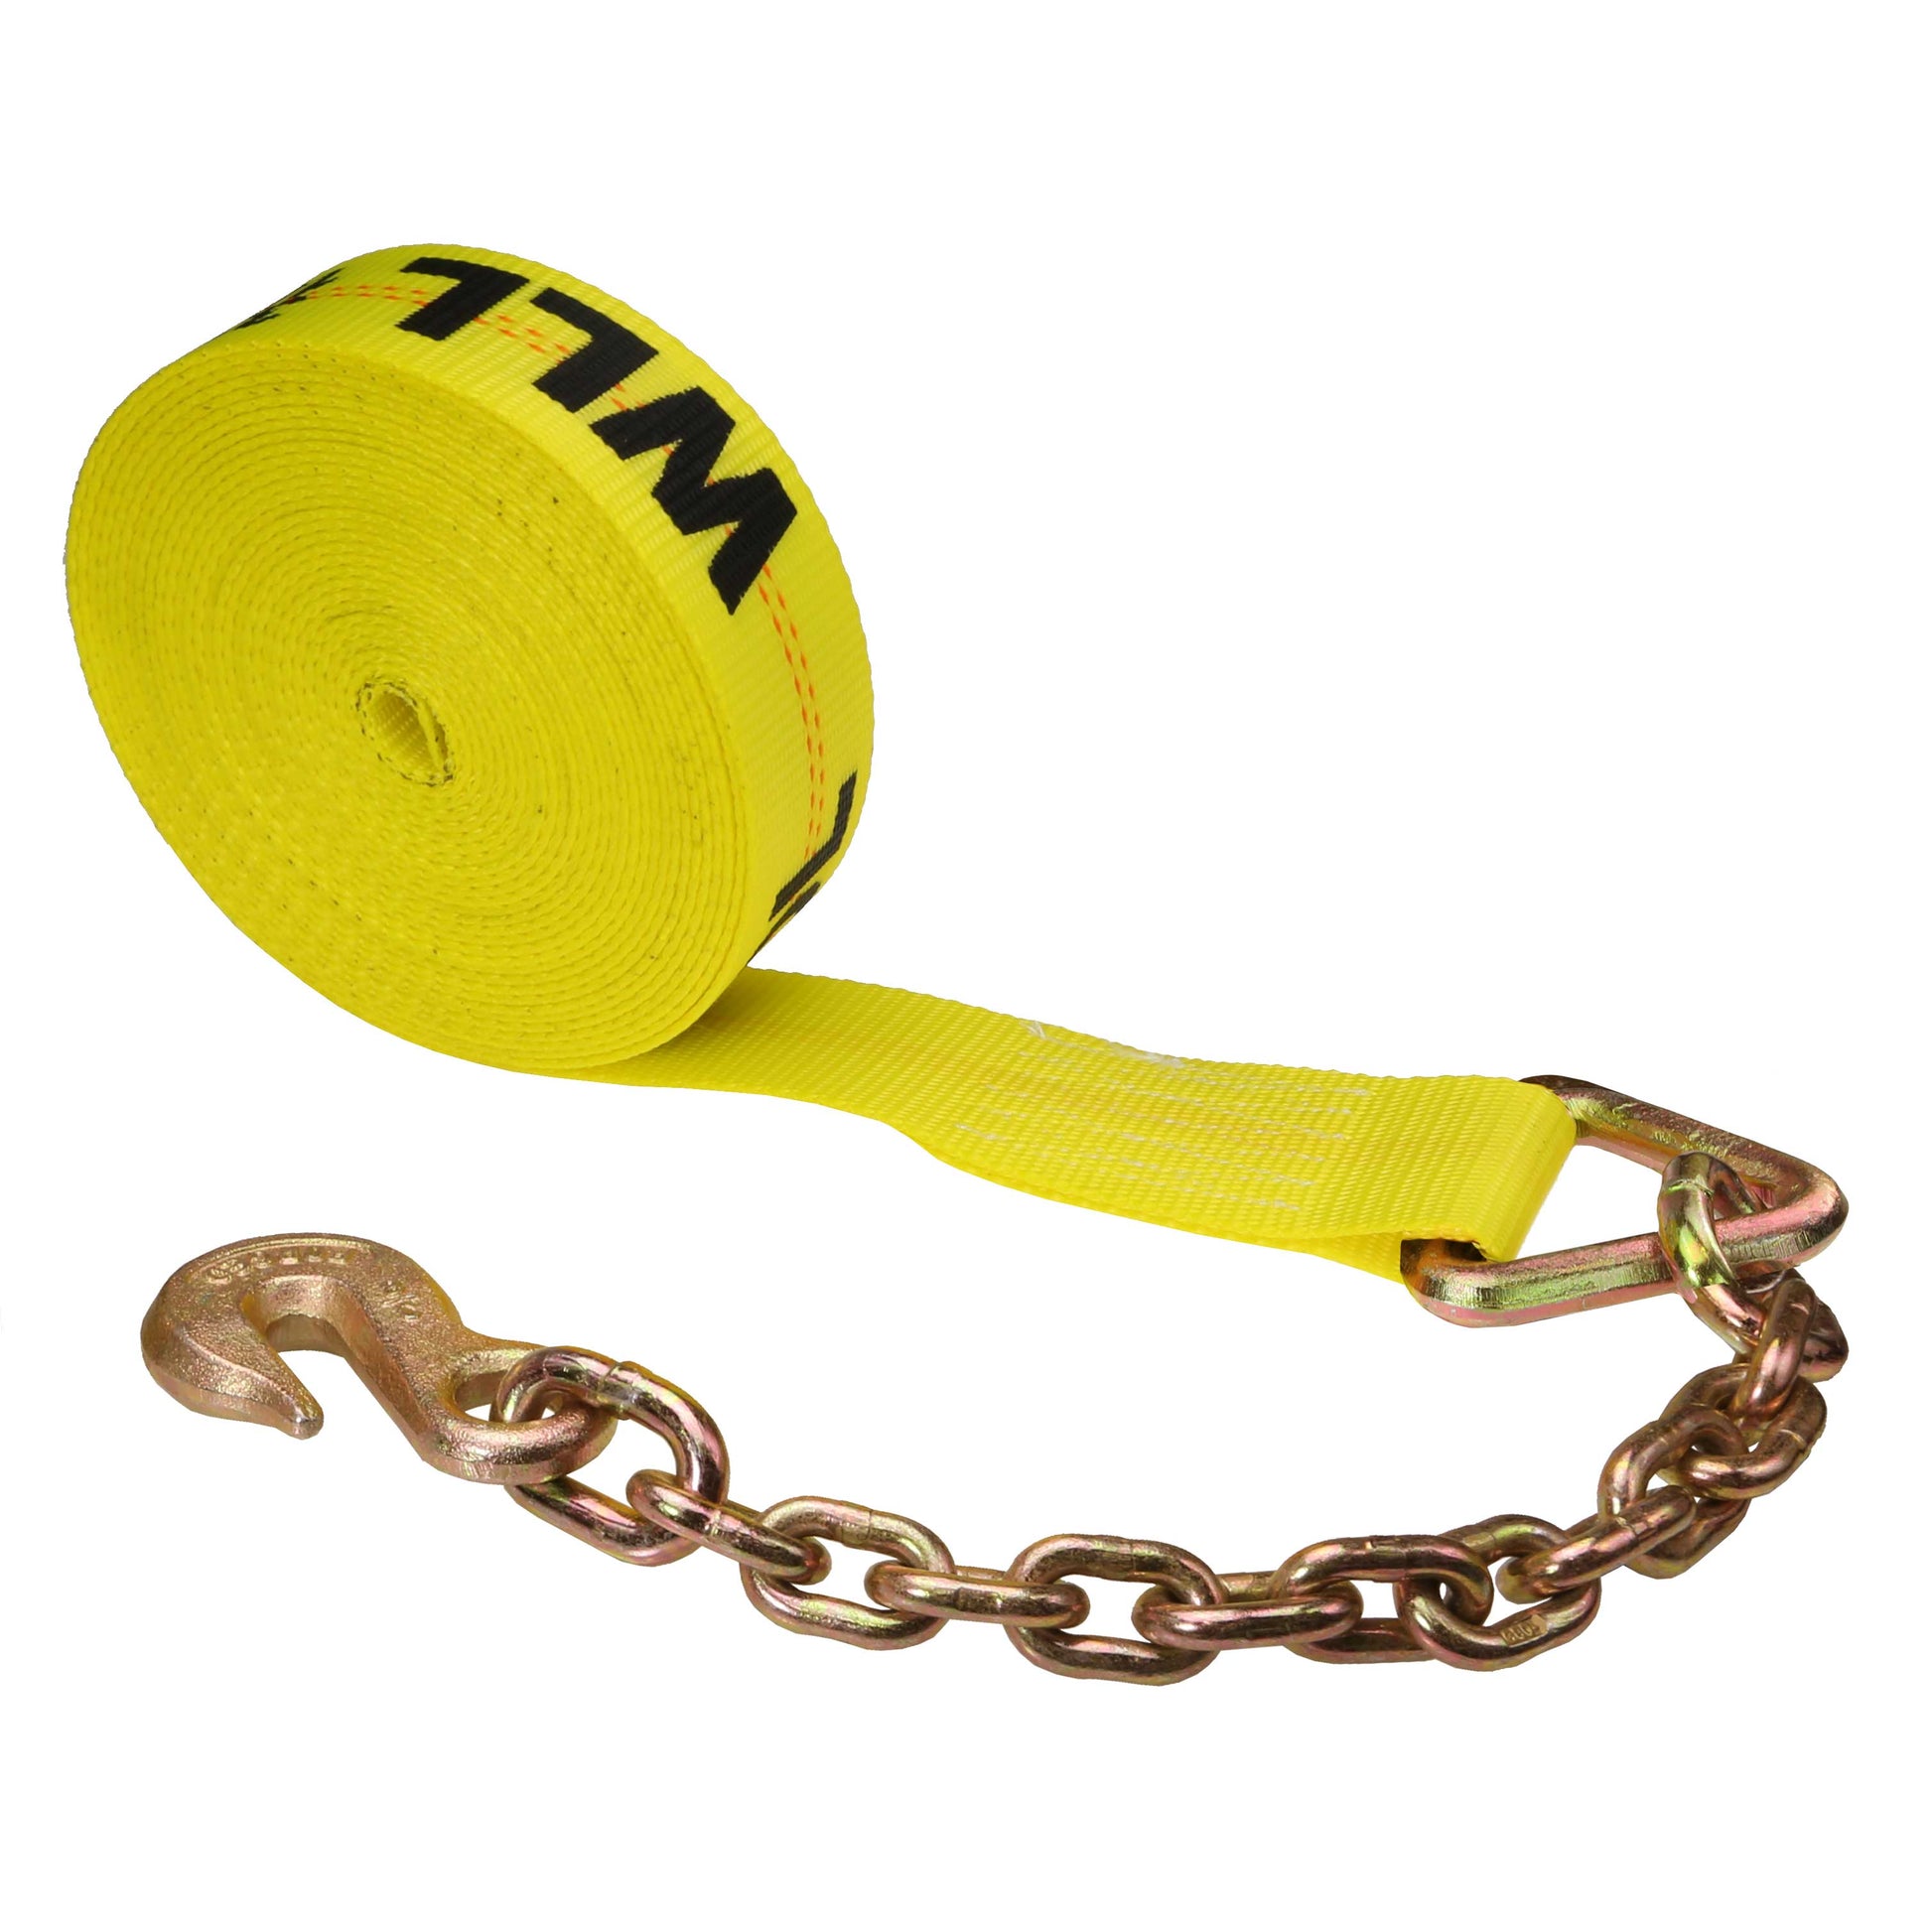 2 inch x 40 foot Winch Strap with Chain Extension